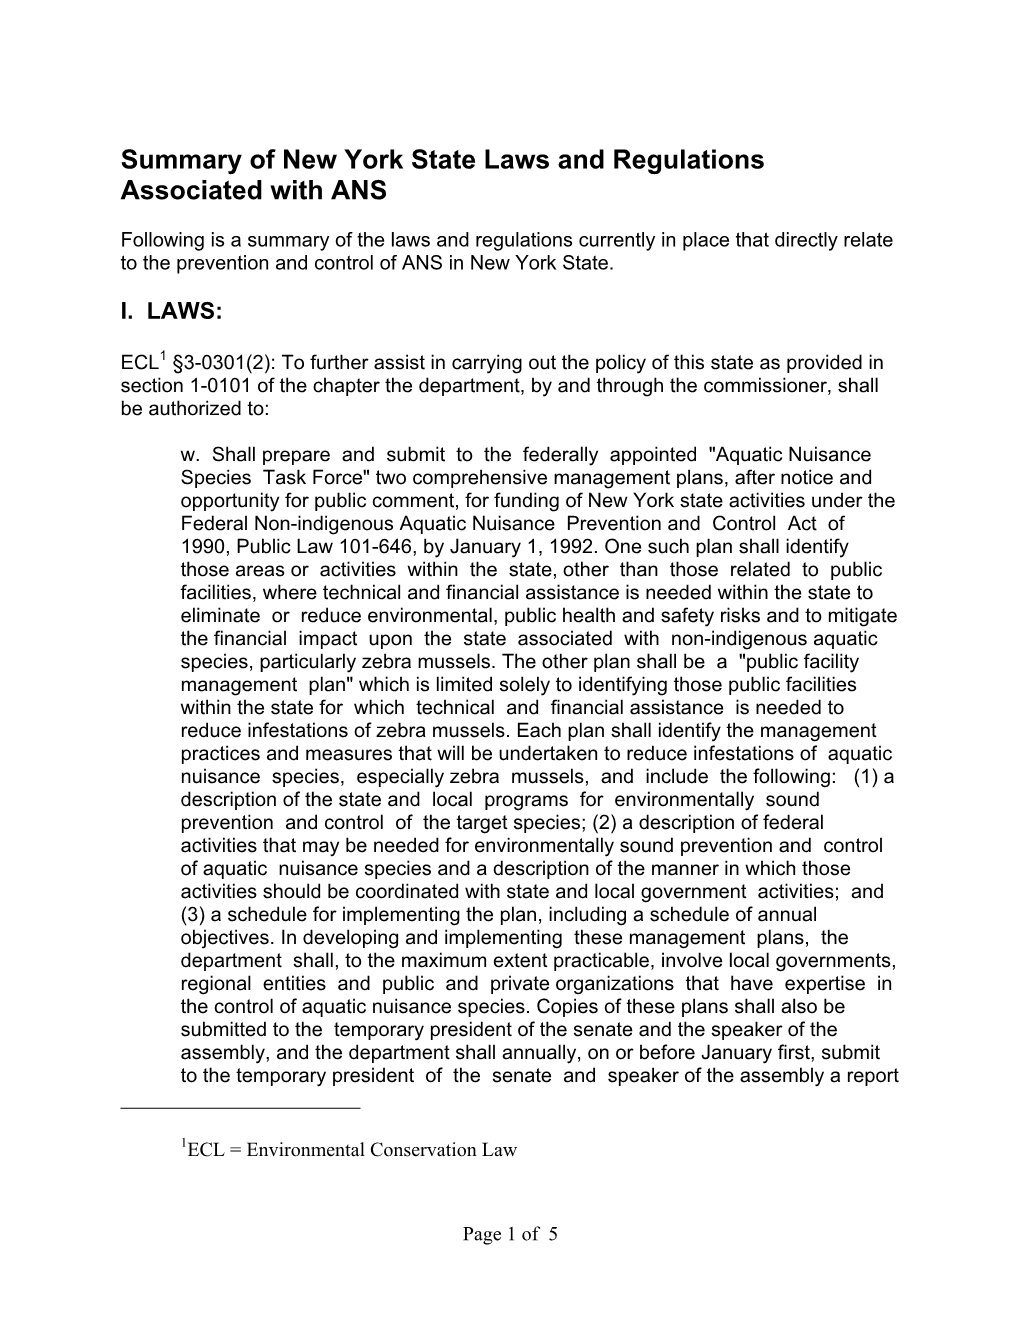 New York State Laws and Regulations Associated with ANS